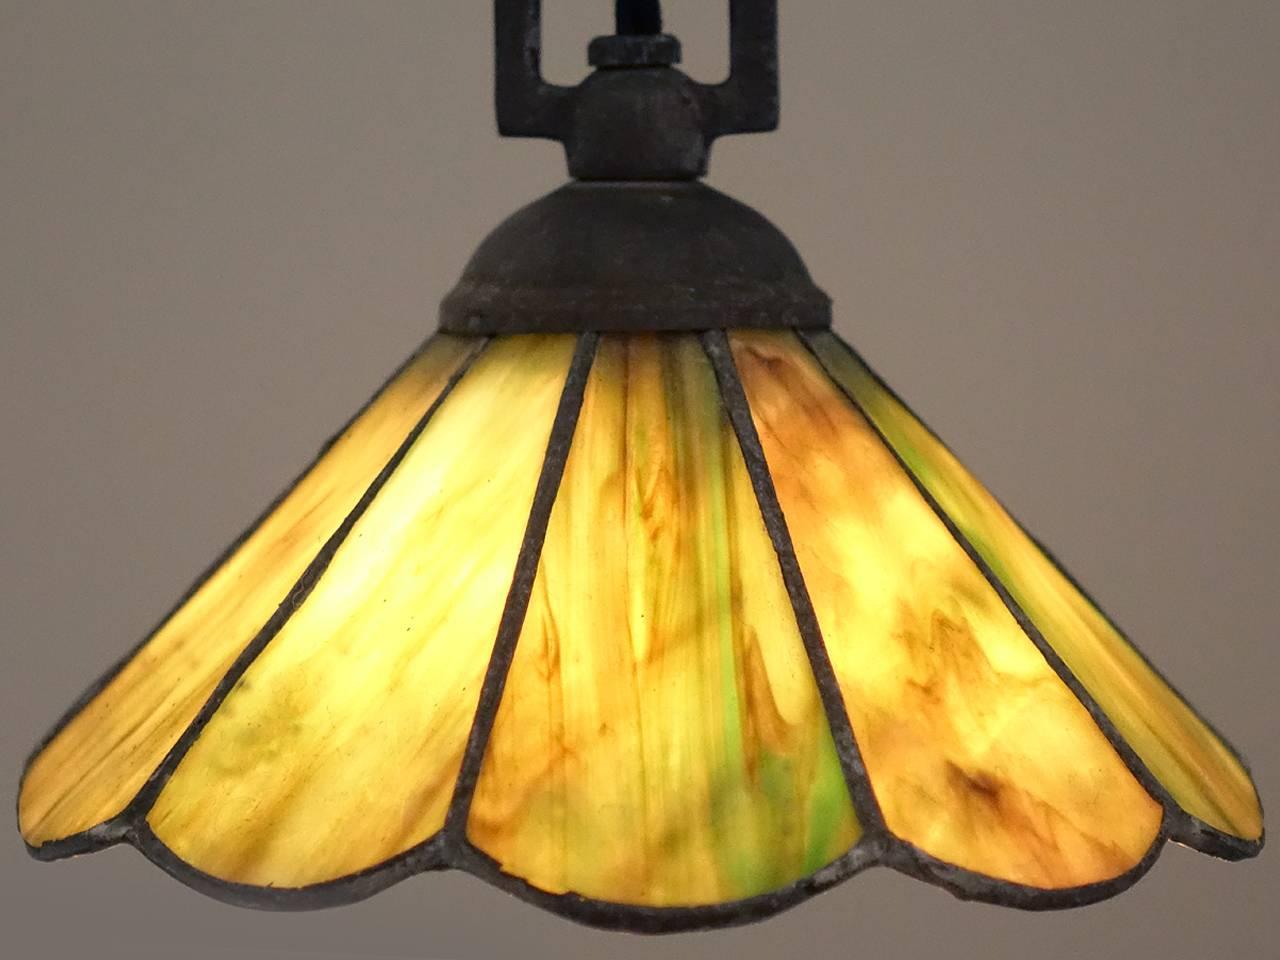 We have a small collection of these early stained glass pendants. Each are only 7.75 inches in diameter and have ten leaded panels with a scalloped edge. All the glass is in good shape with no cracks. The glass and lead have a weathered patina also